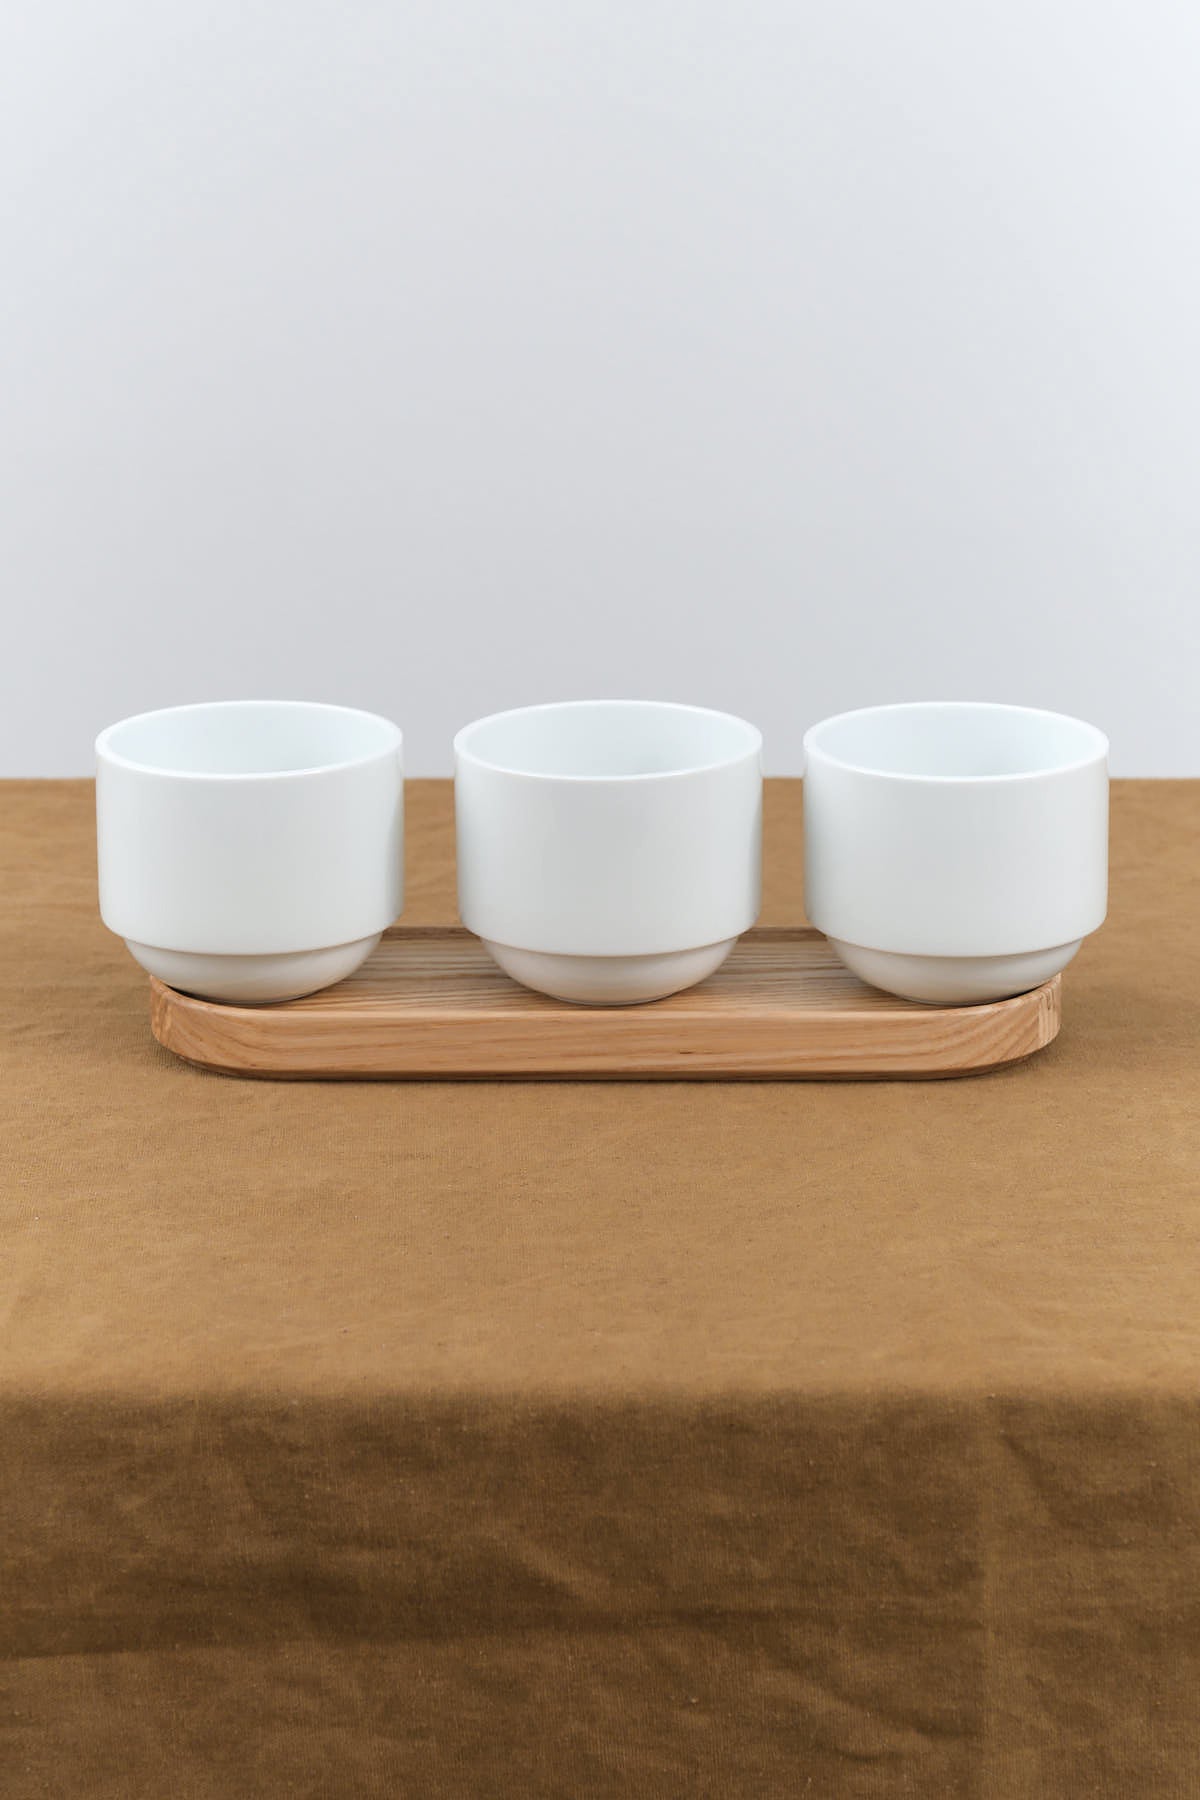 Styled Tasting Cup